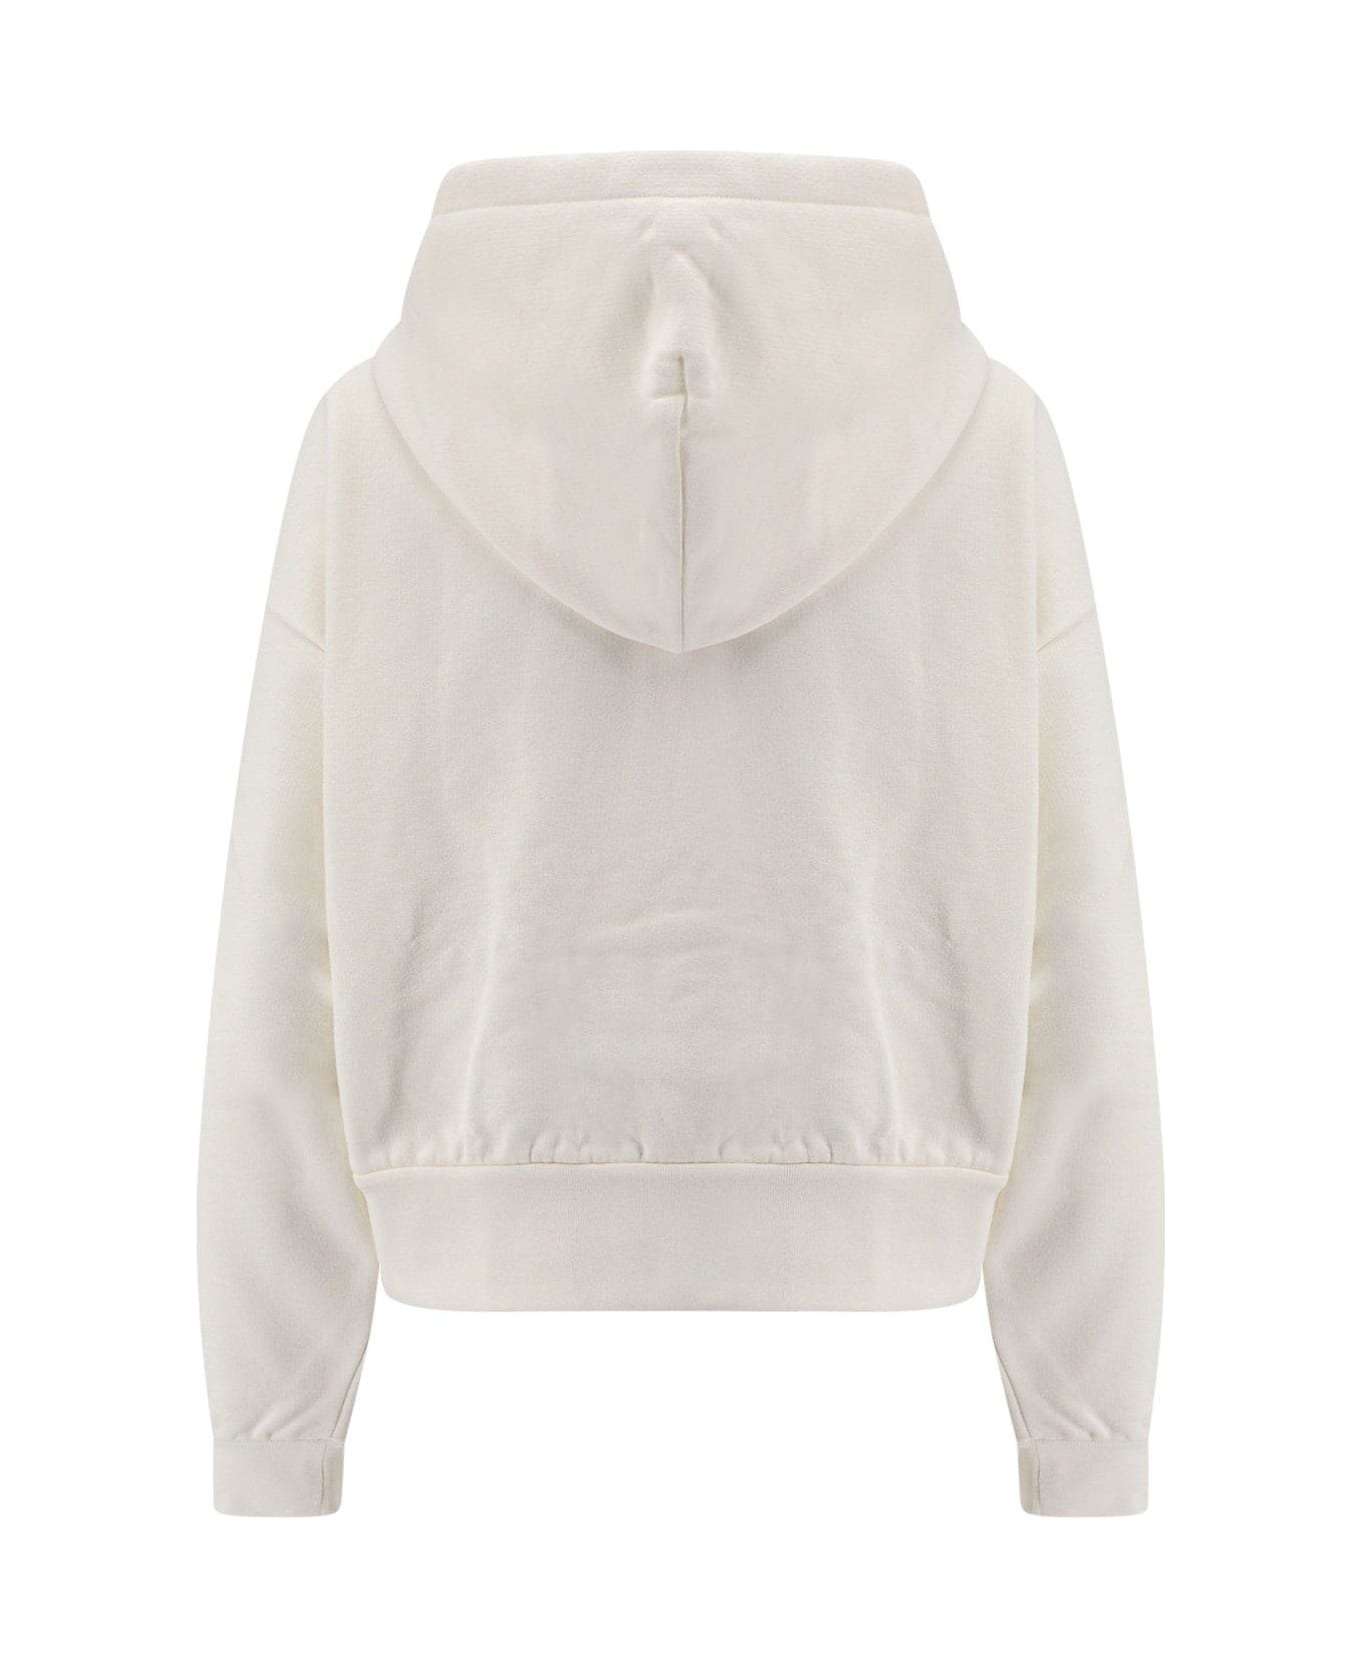 Gucci Logo Embroidered Jersey Hoodie - Sunlight